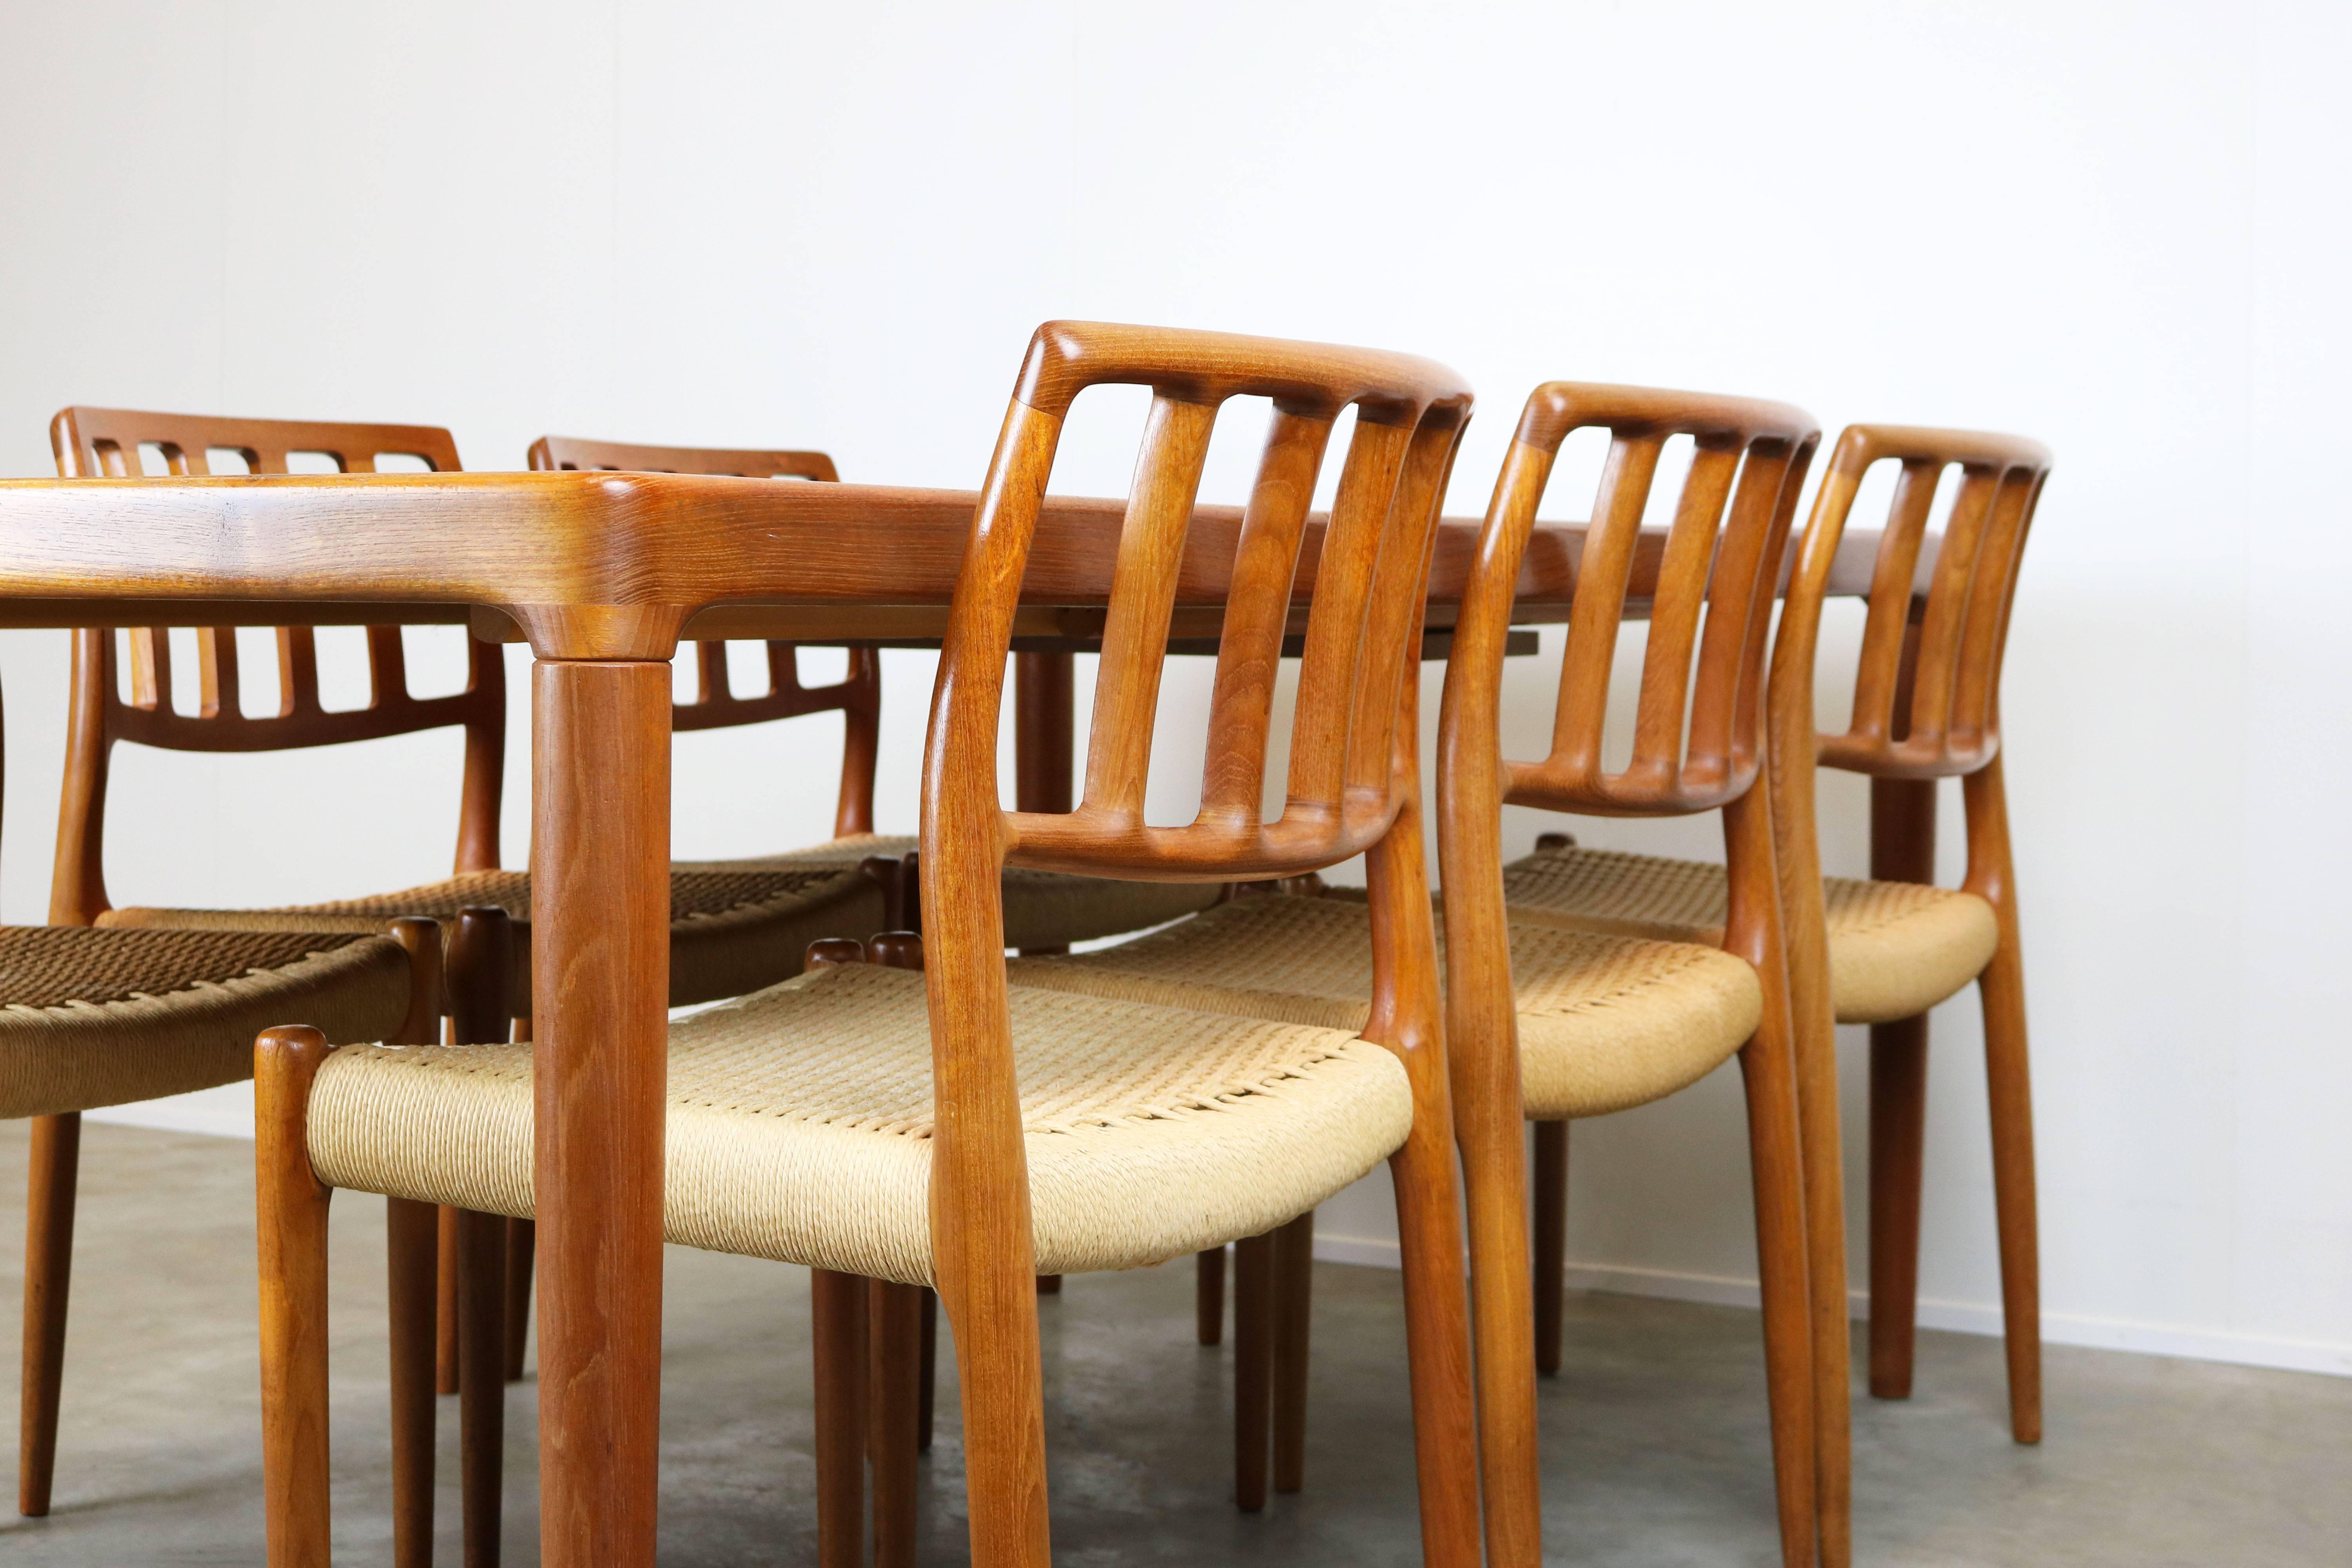 Magnificent Danish dining room set by Niels Otto Moller for JL Moller Mobelfabrik, 1960. The set consists of six teak and papercord model.83 chairs and original matching teak table (extendable). Set is in wonderfull original condition. A perfect set